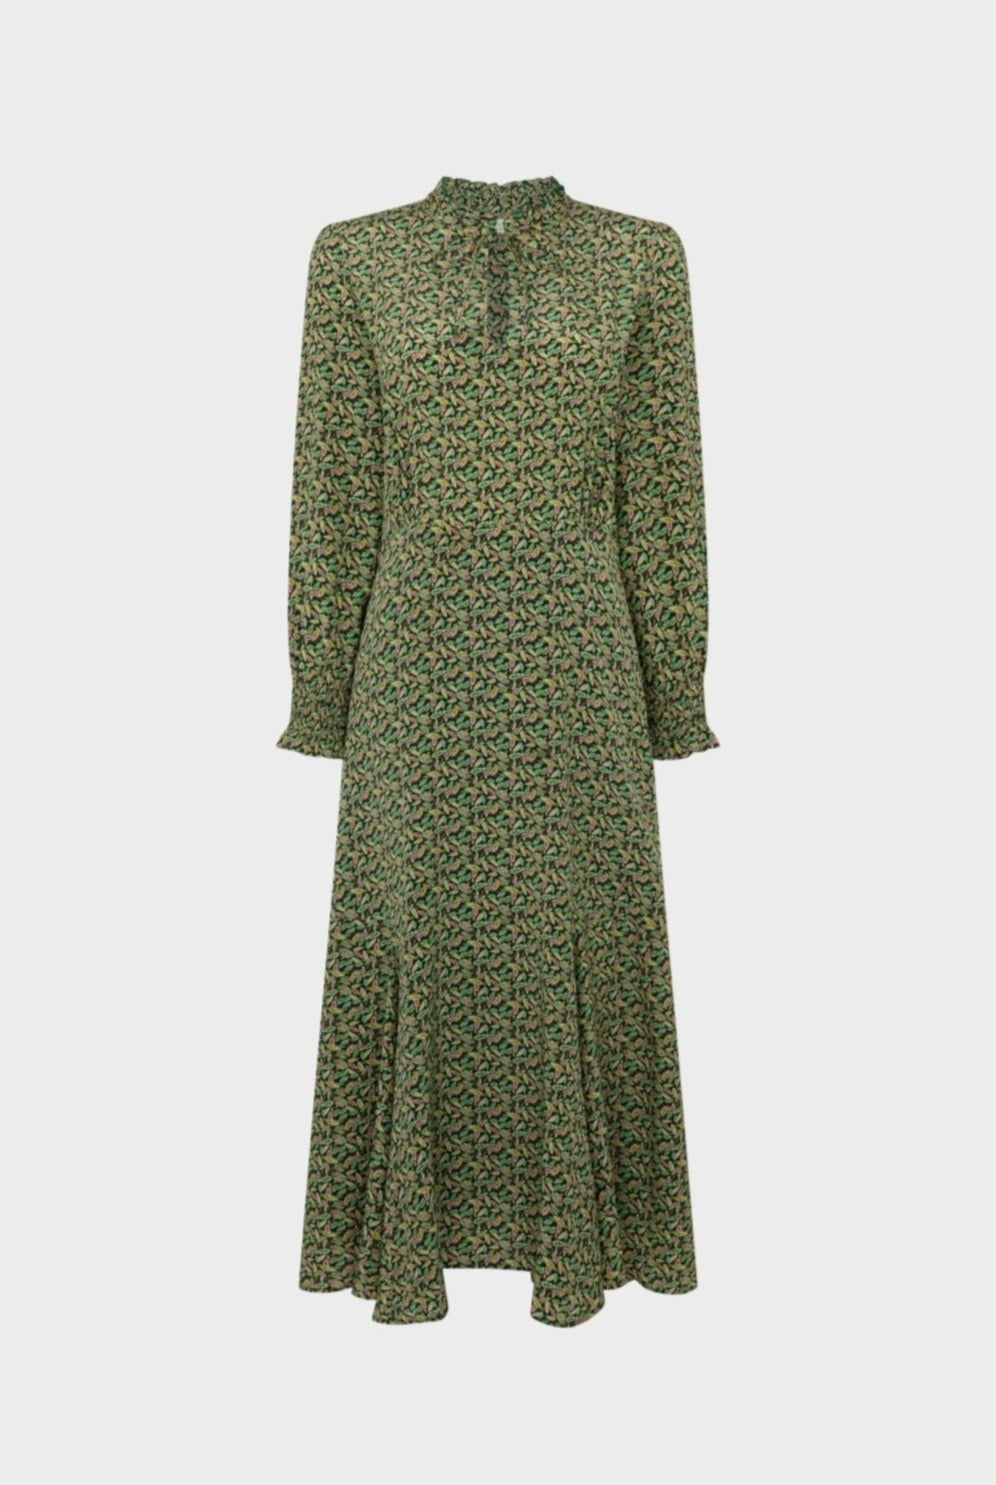 Made from 100% Silk Crepe de Chine, this Silk Pleated Dress is a transeasonal must-have for Autumn. Coming in a Green Leaves Liberty Print fabric, this dress exudes elegance. Pair with chunky boots or heels to create a stylish Autumnal outfit.